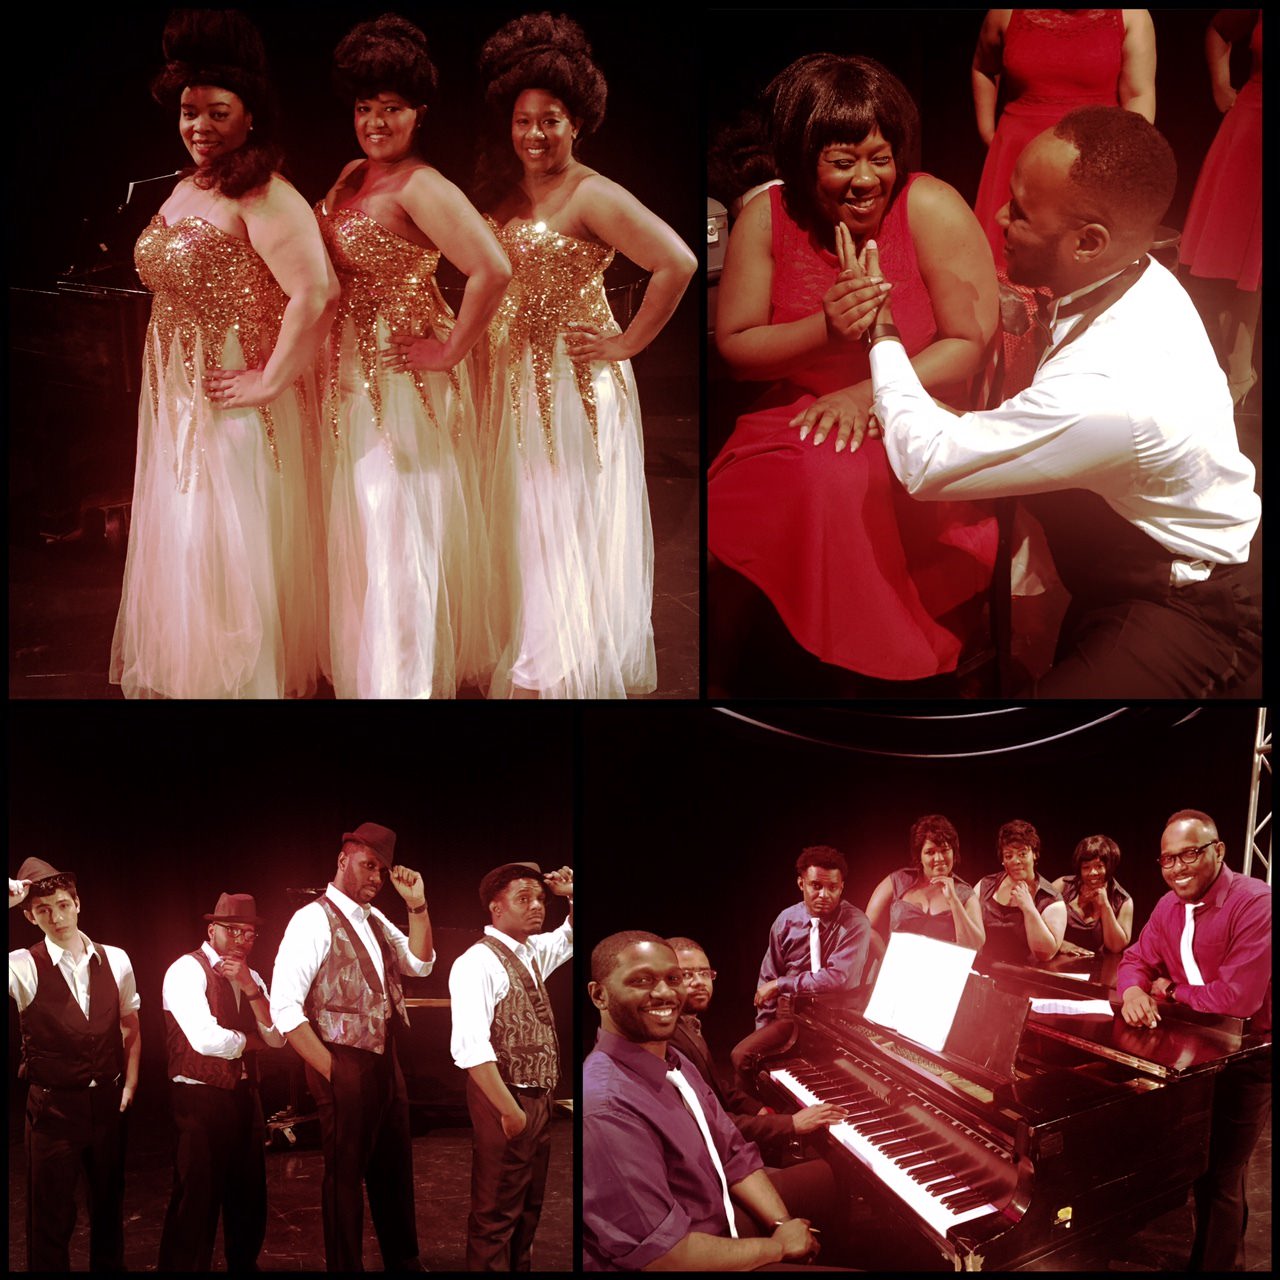 Dreamgirls Presented by Tantallon Community Players
May 27 - June 12, 2016
tantallonplayers.org
Photo by Kandace Foreman